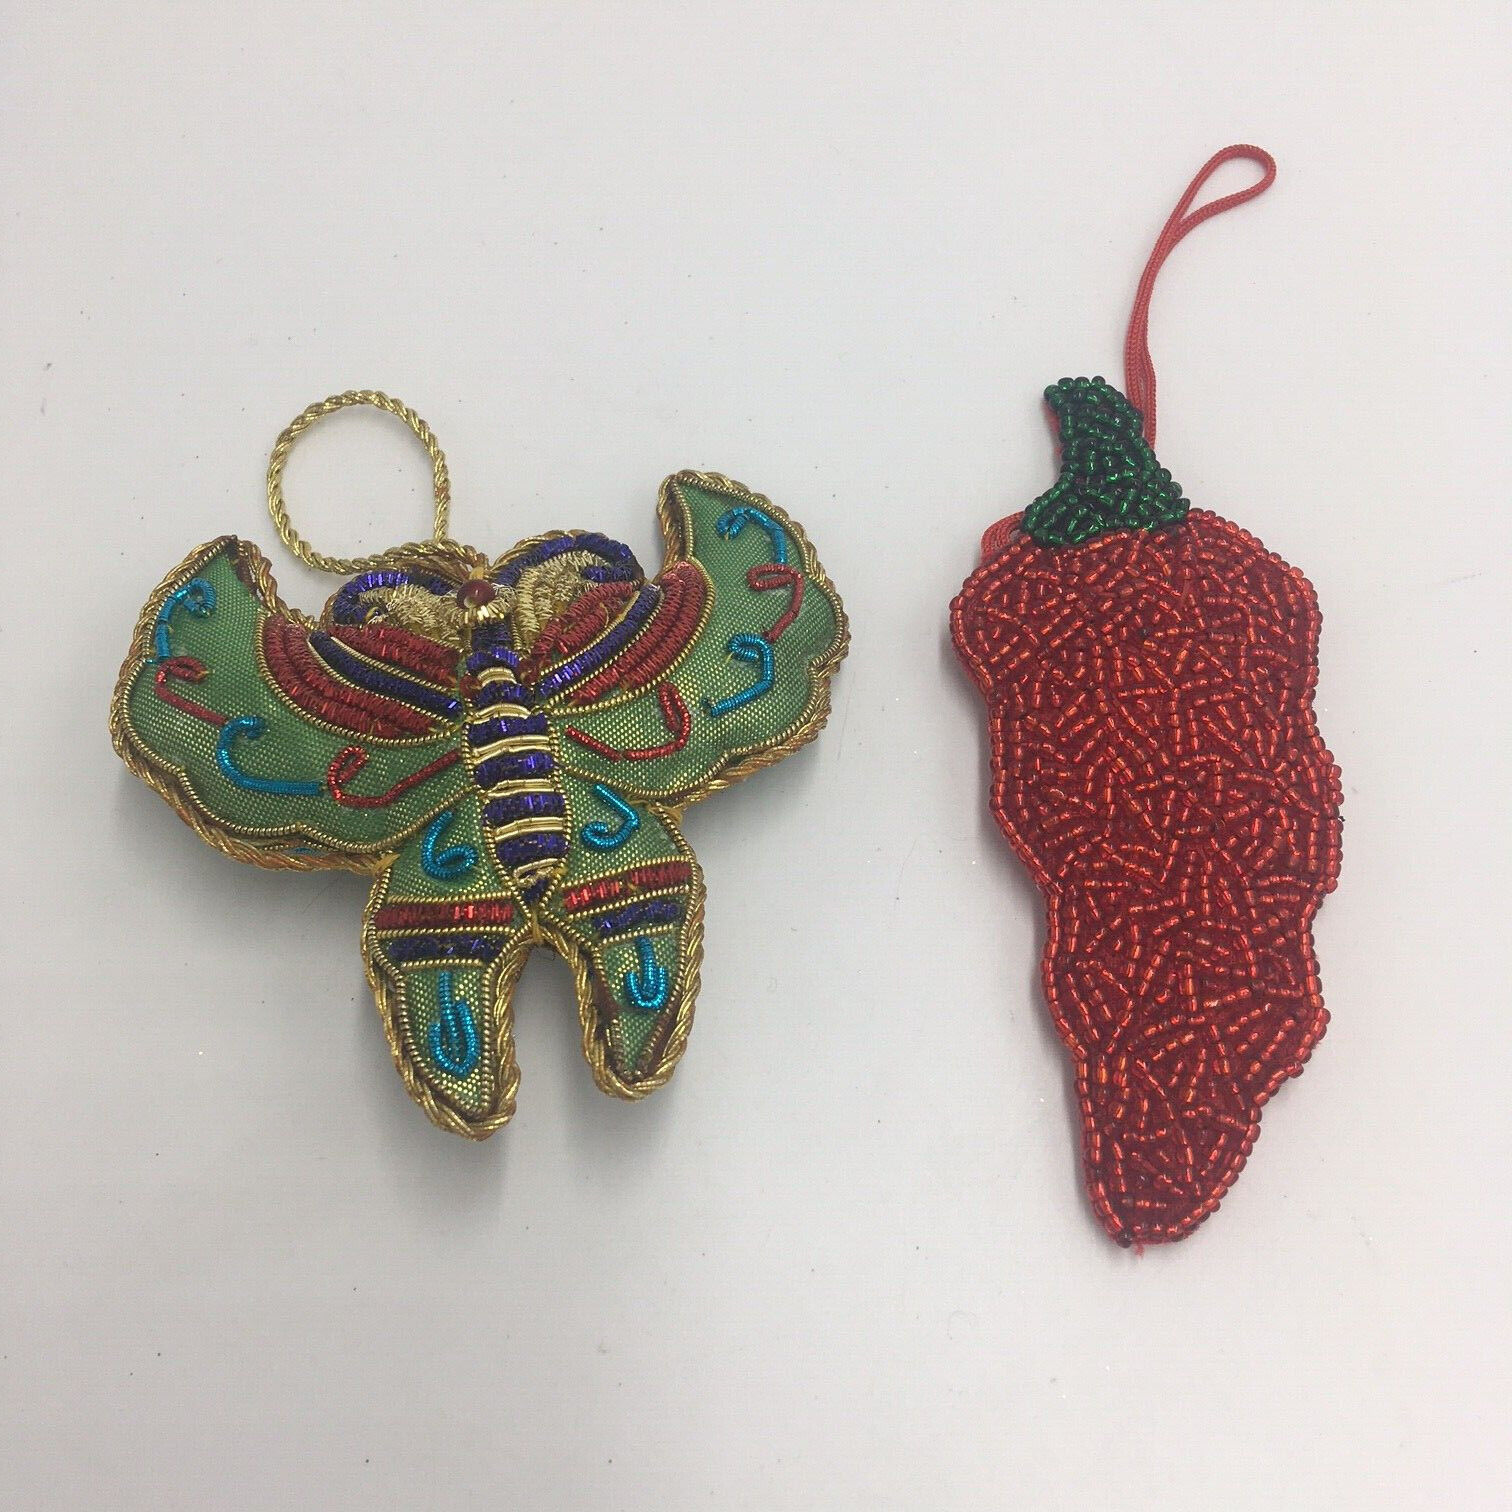 Lot of 2 Vintage Christmas Ornaments Metallic Beaded Butterfly and Chili Pepper 